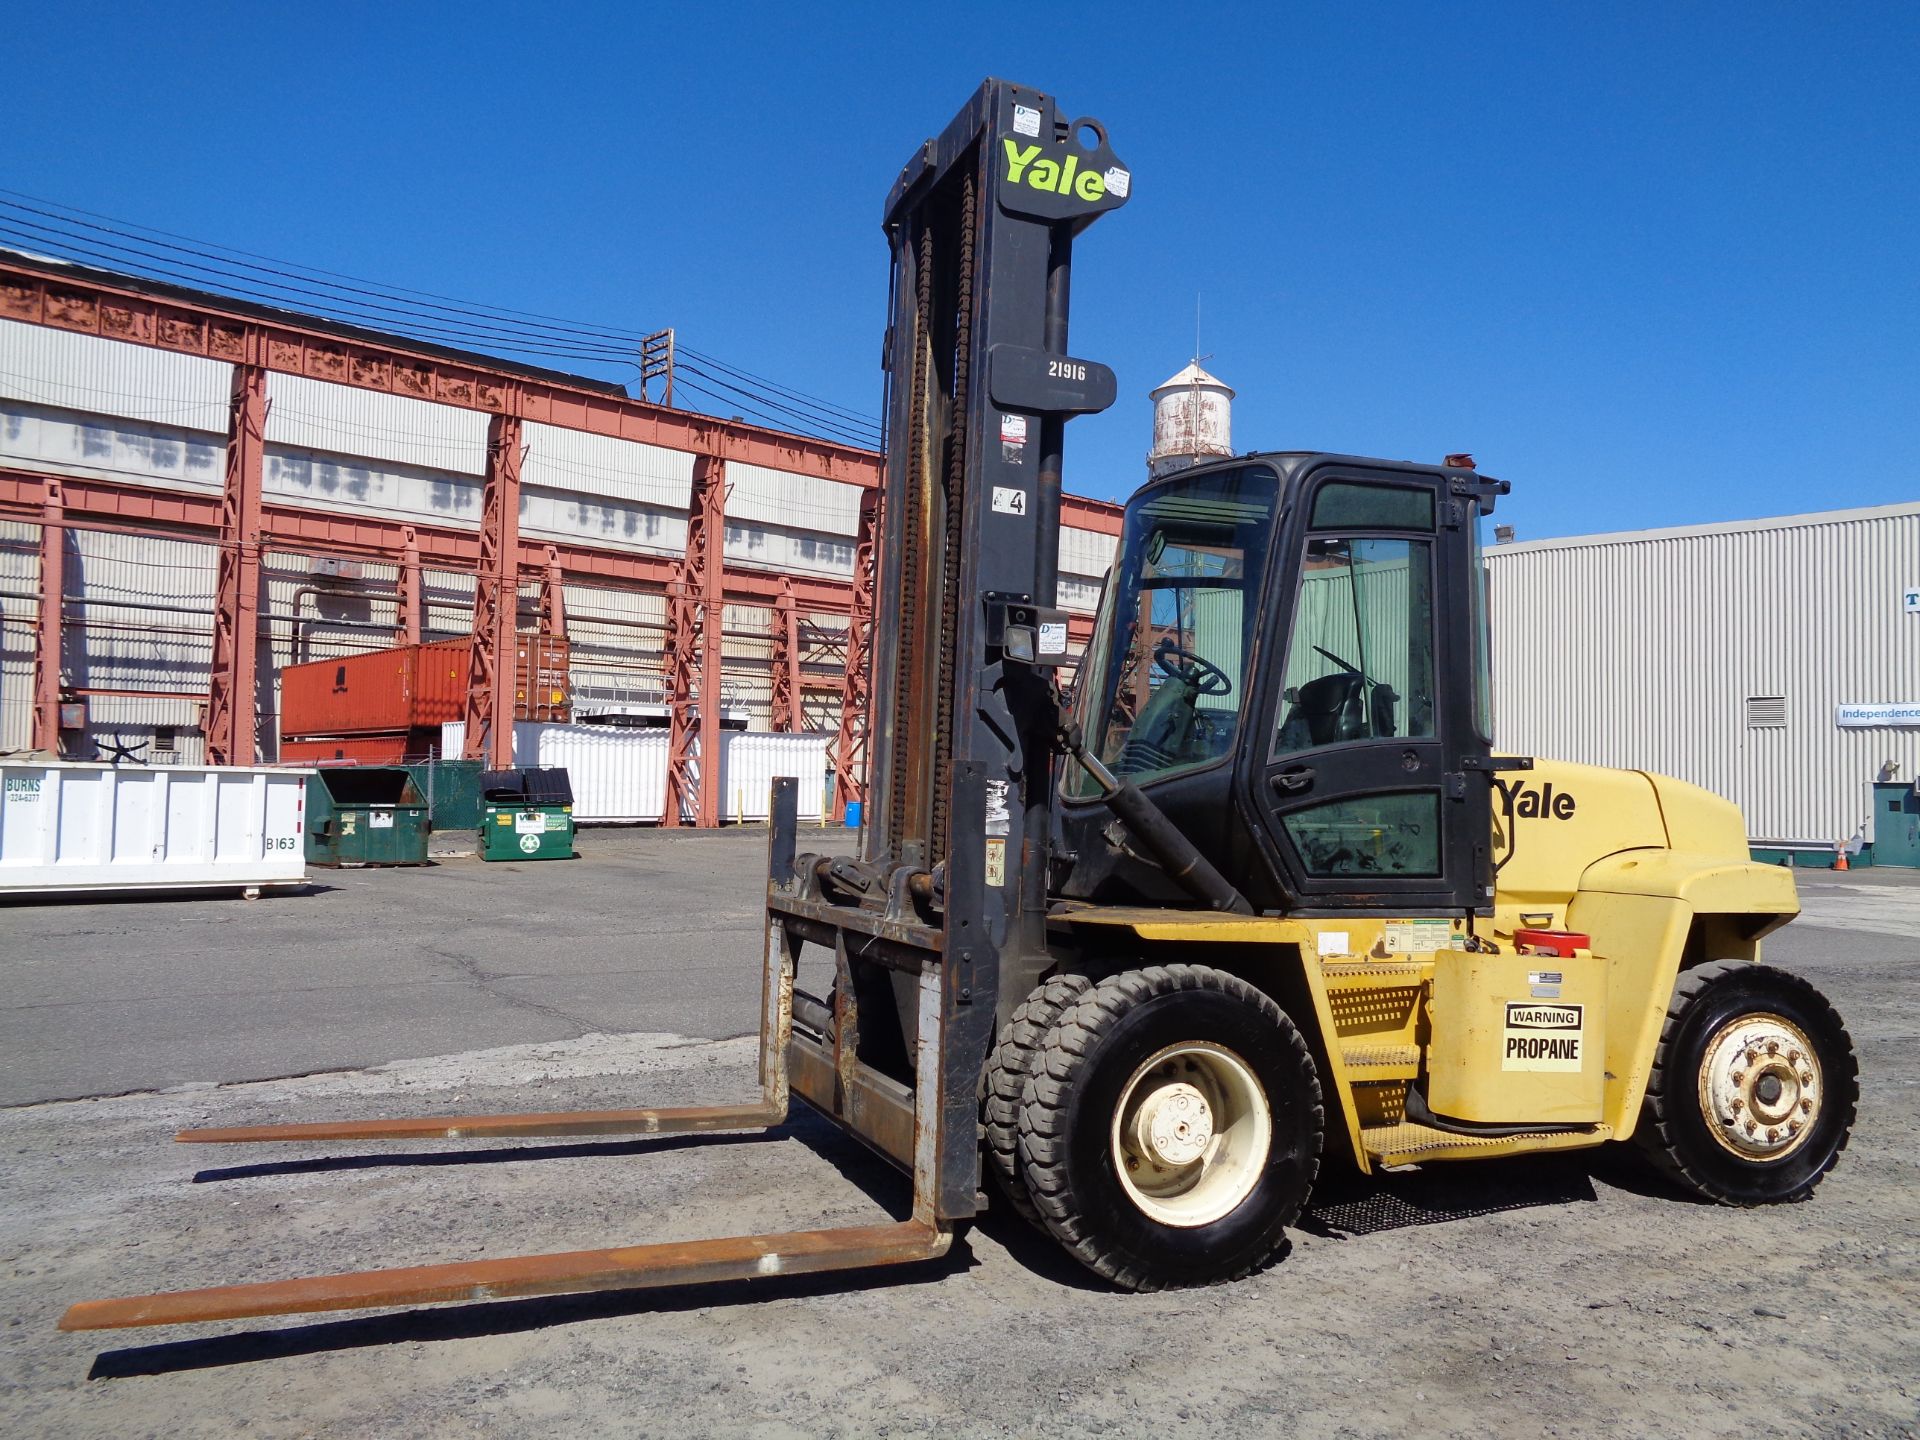 2006 Yale GP210DC 21000 lbs Forklift - Image 2 of 20